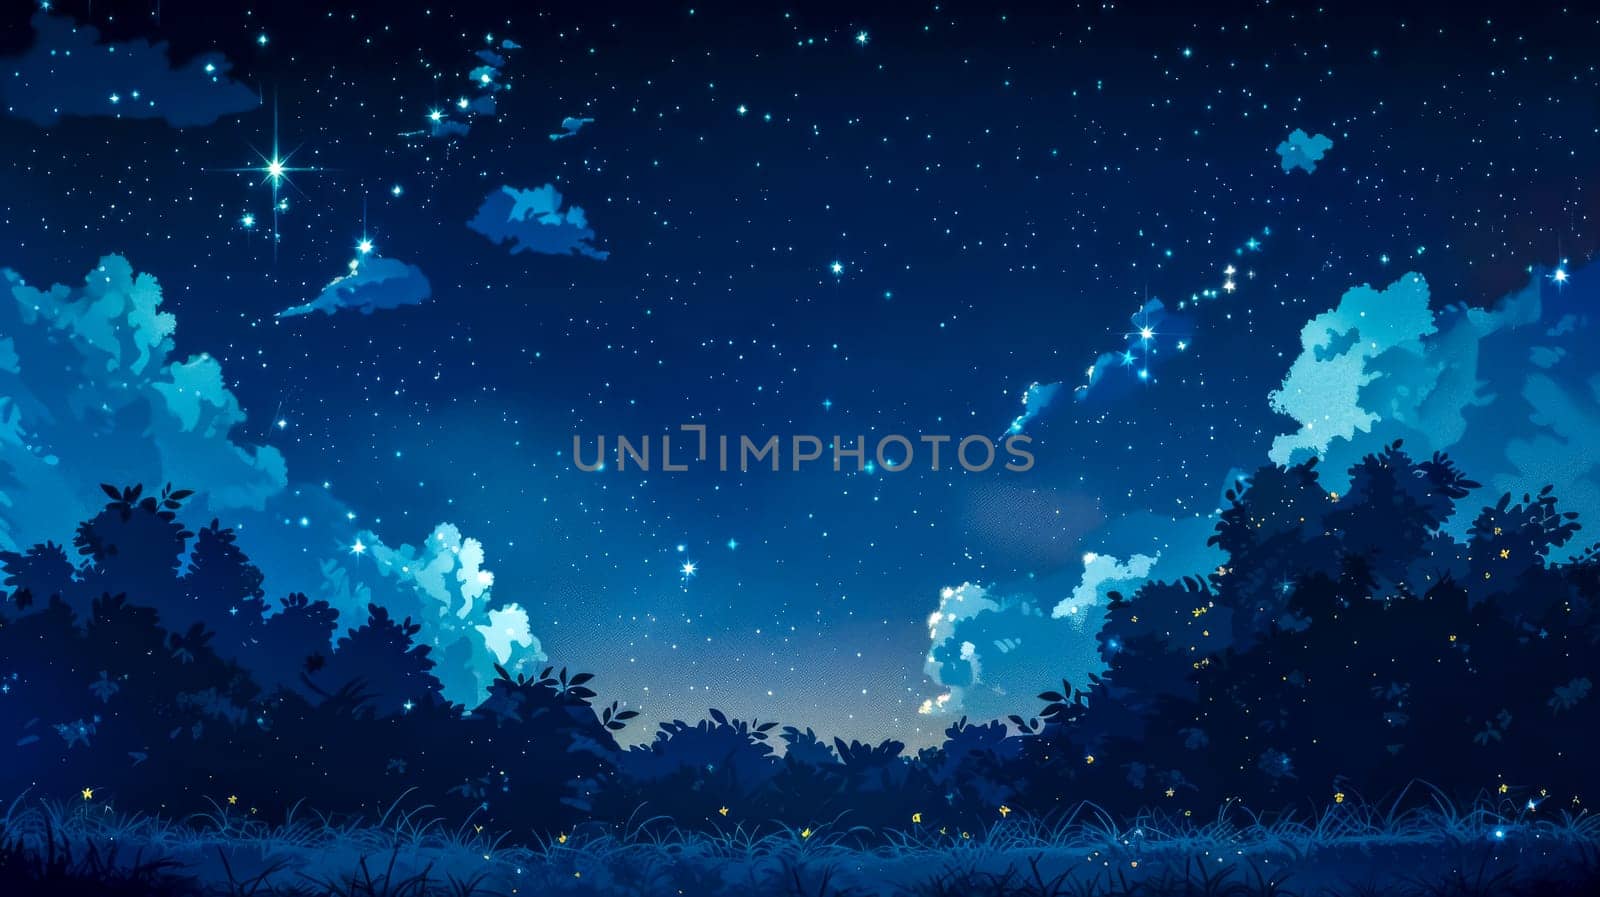 Digital illustration of a mesmerizing night sky with stars and shooting stars above a silhouetted landscape